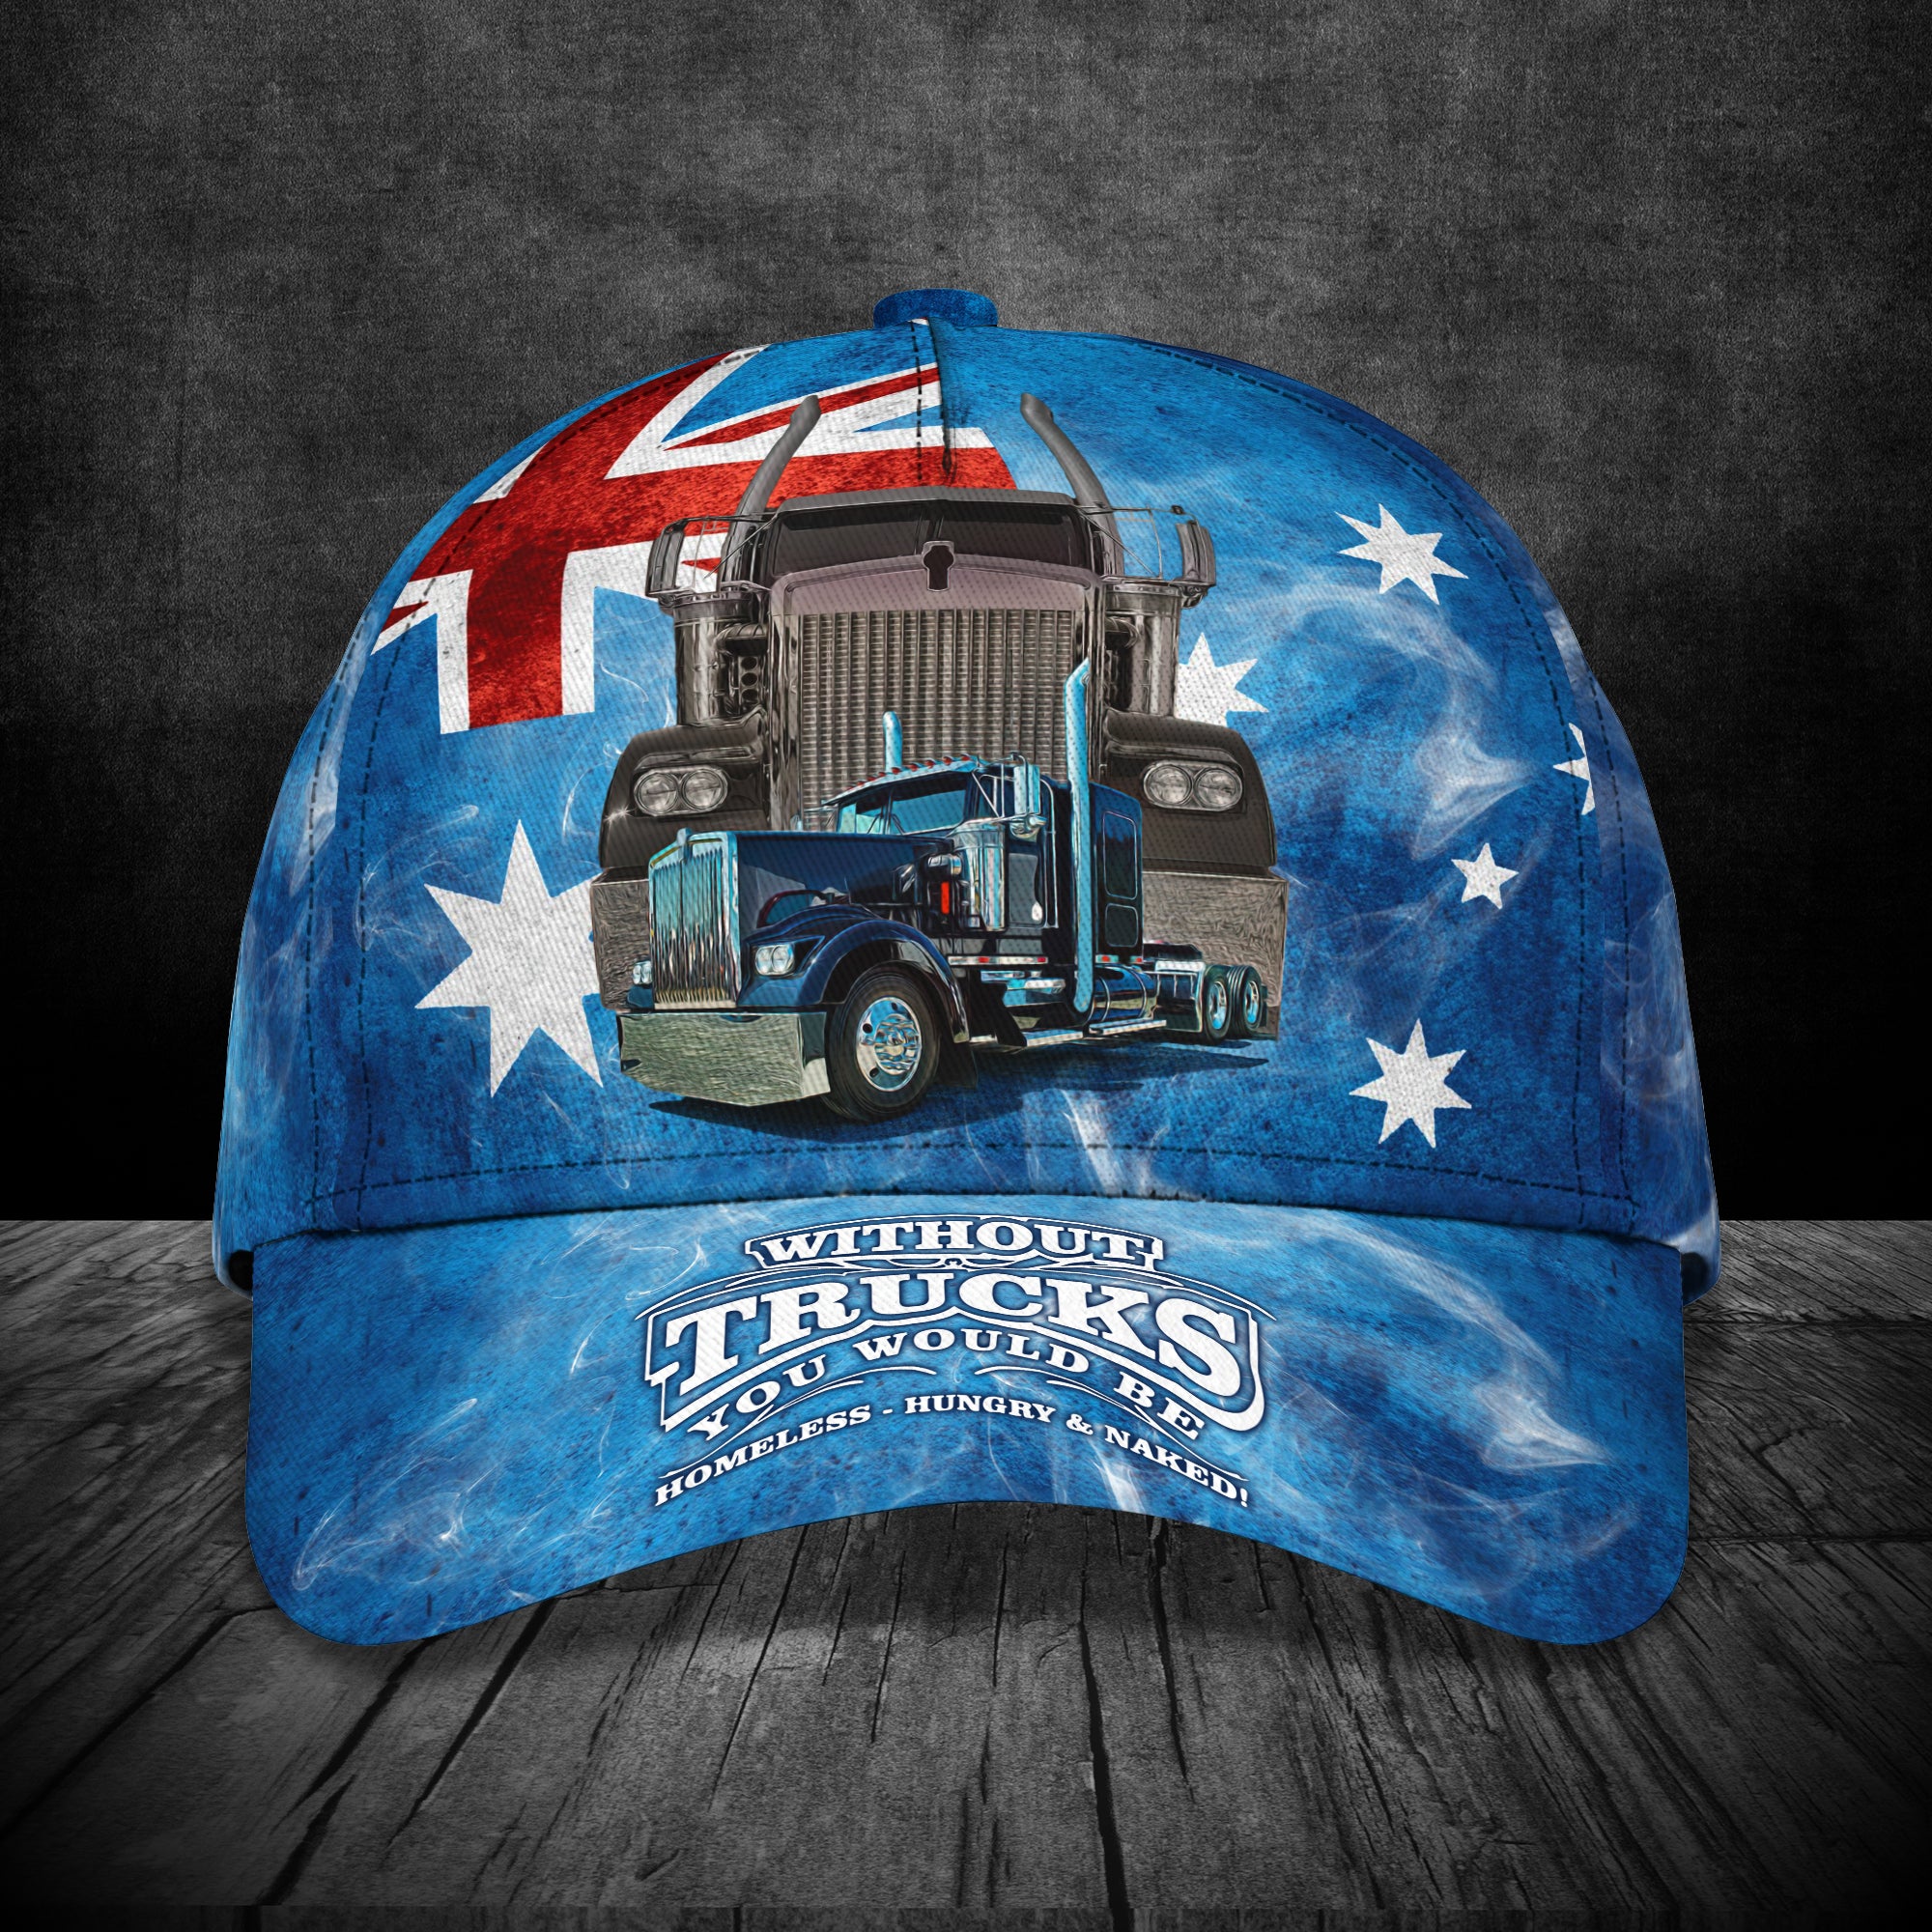 Trucker Aus - Personalized Name Cap- Nsd99